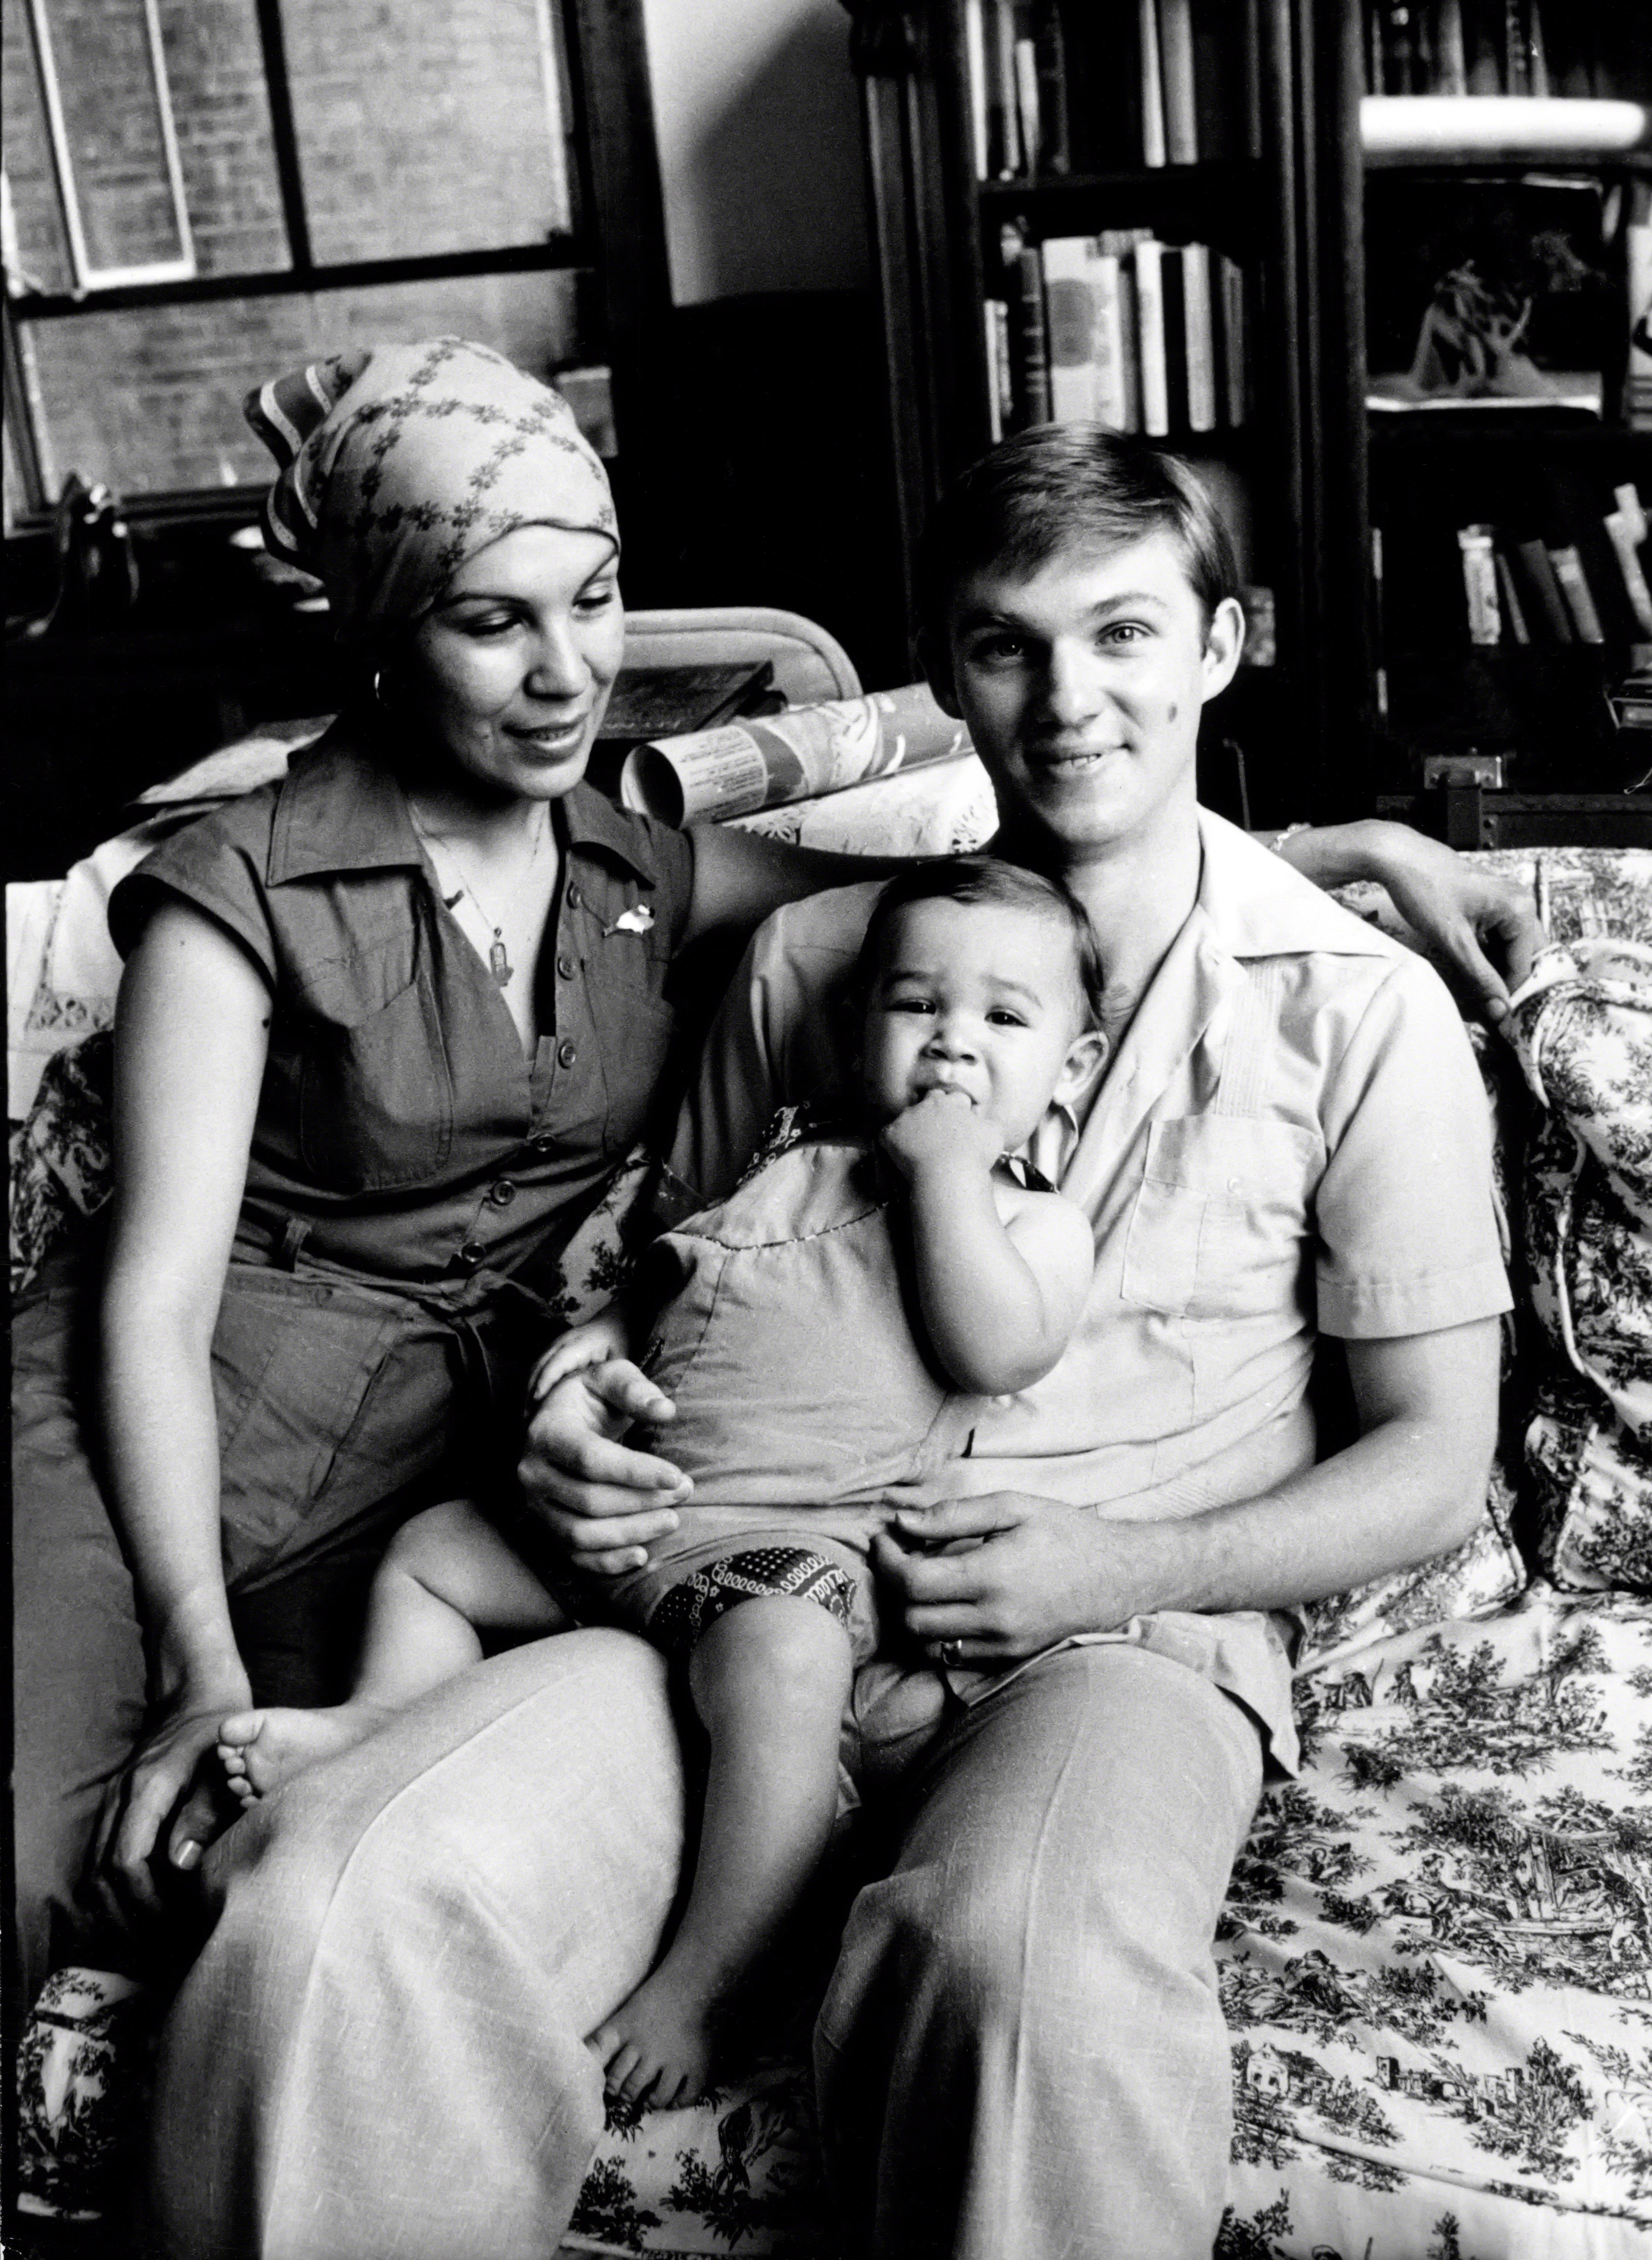 Richard Thomas and his family circa 1977 in New York City | Source: Getty Images